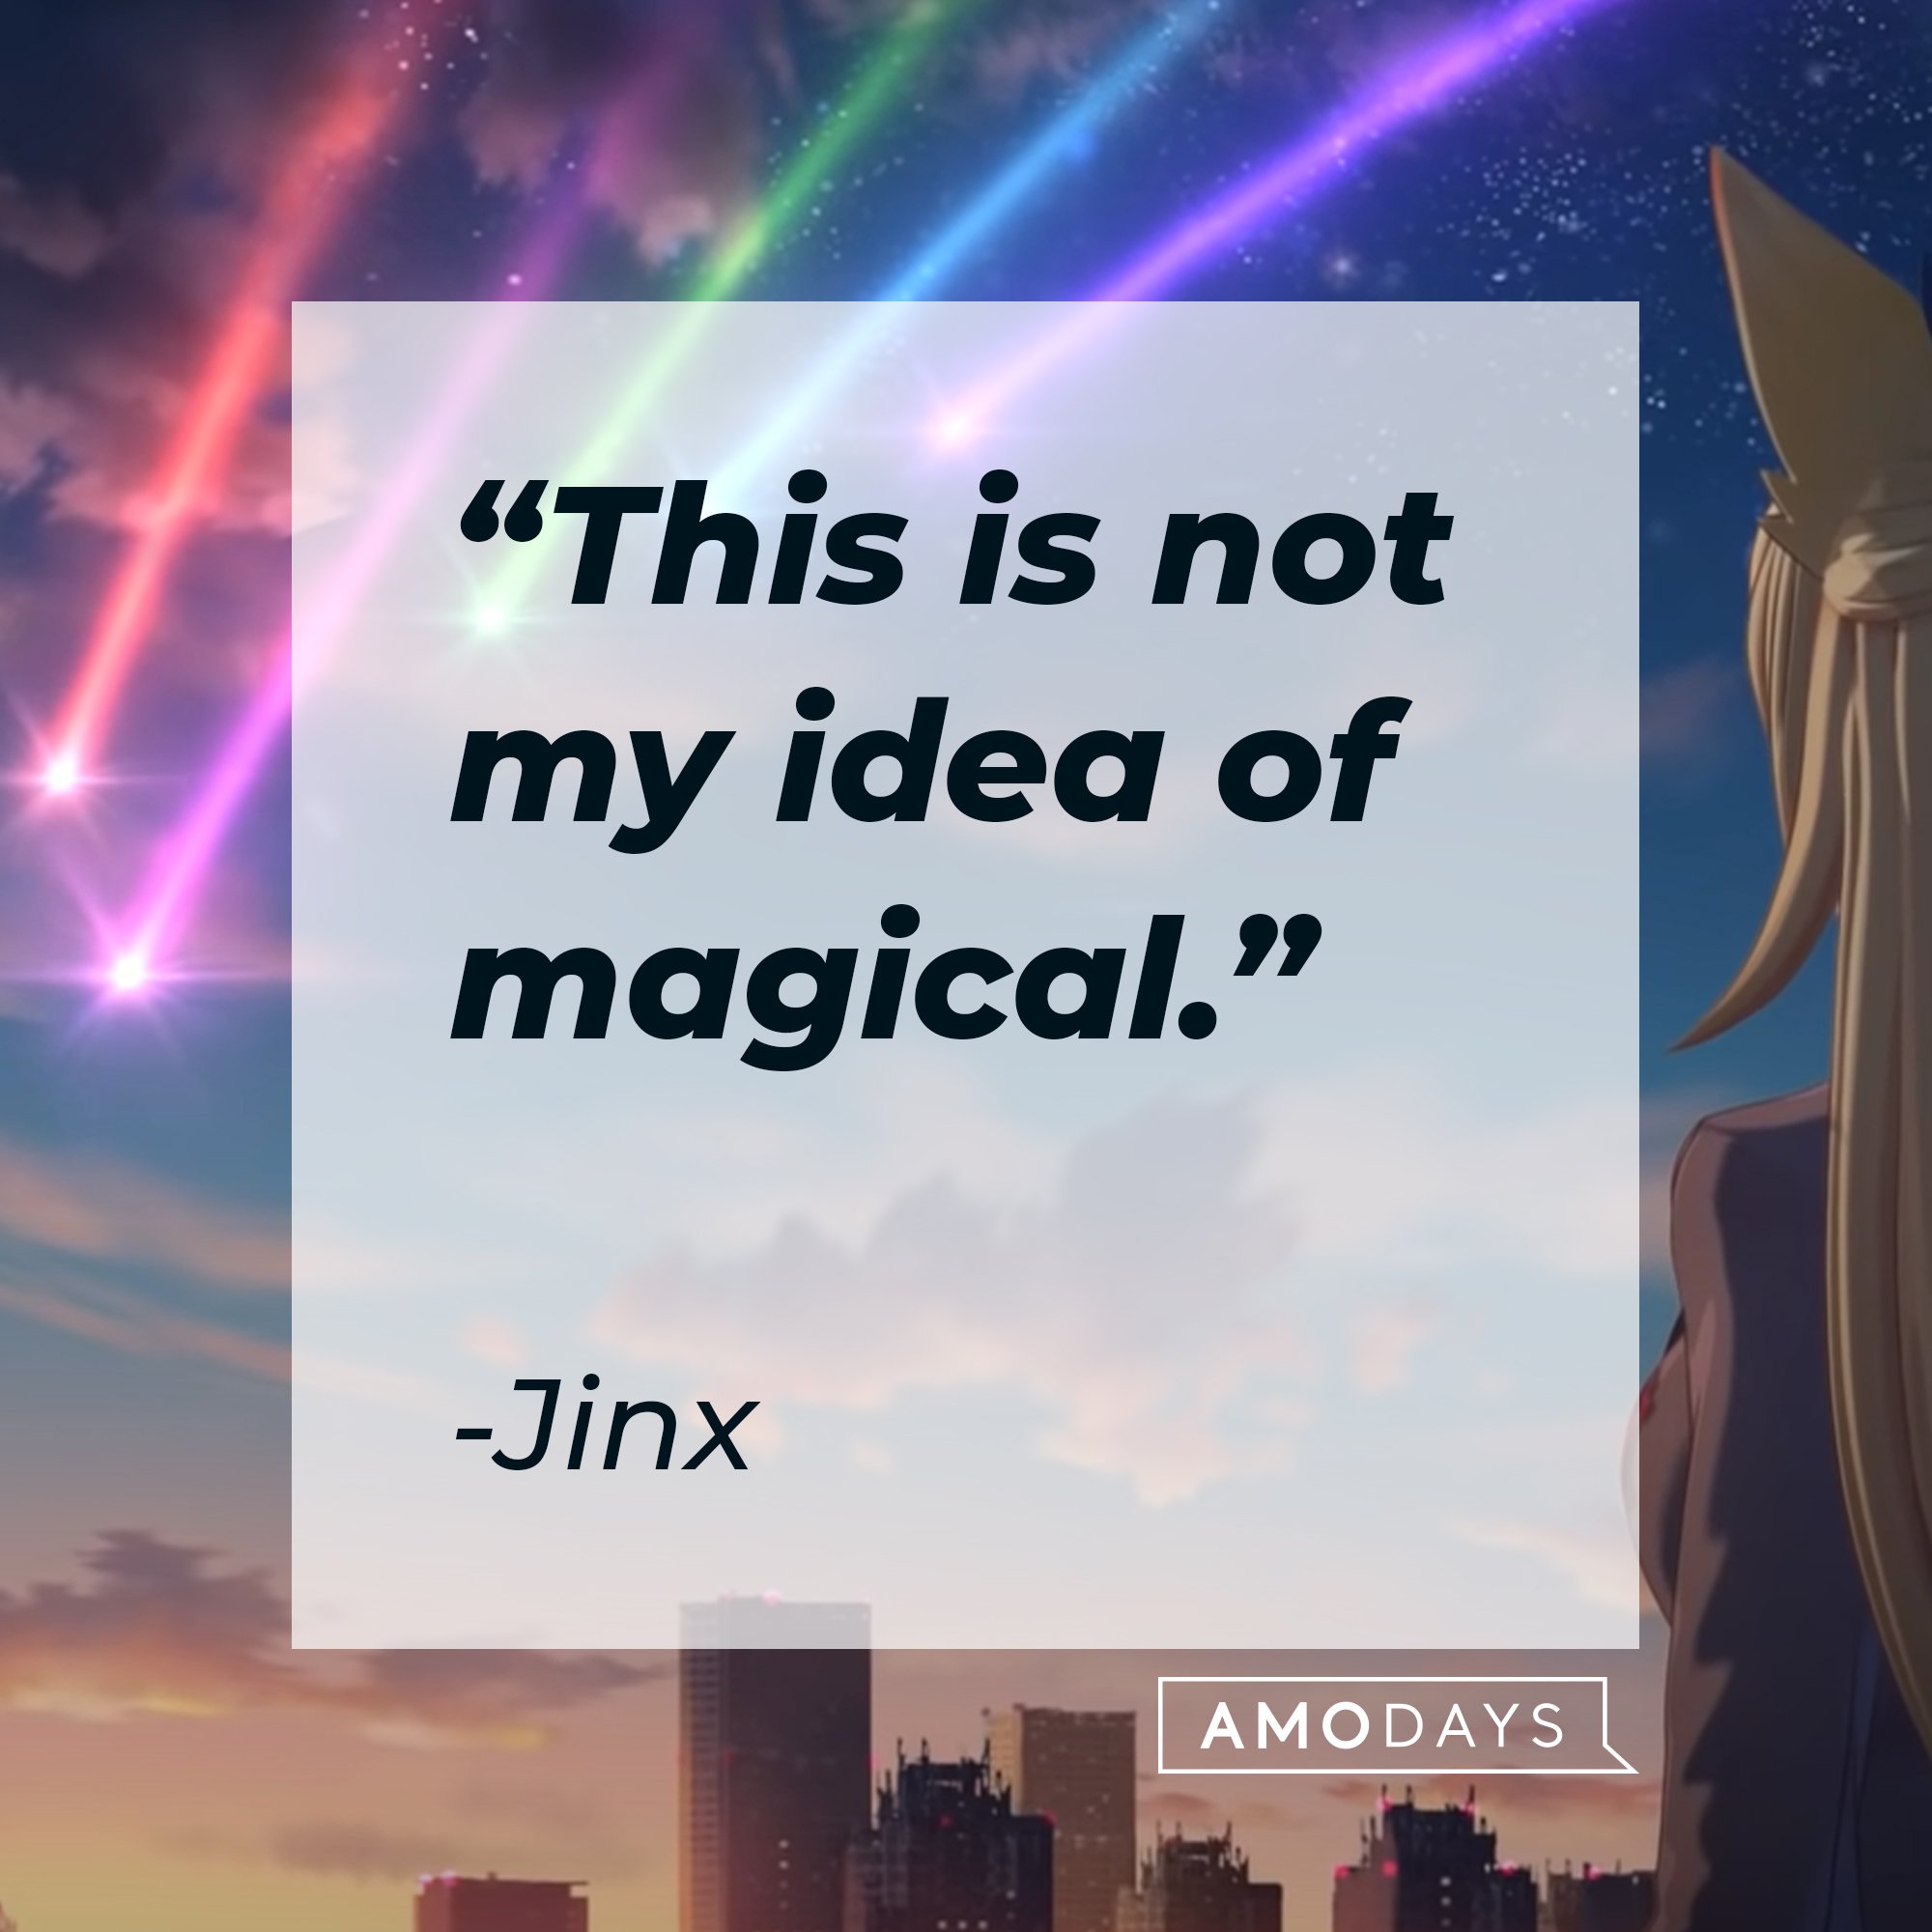 Jinx's quote: "This is not my idea of magical." | Image: AmoDays